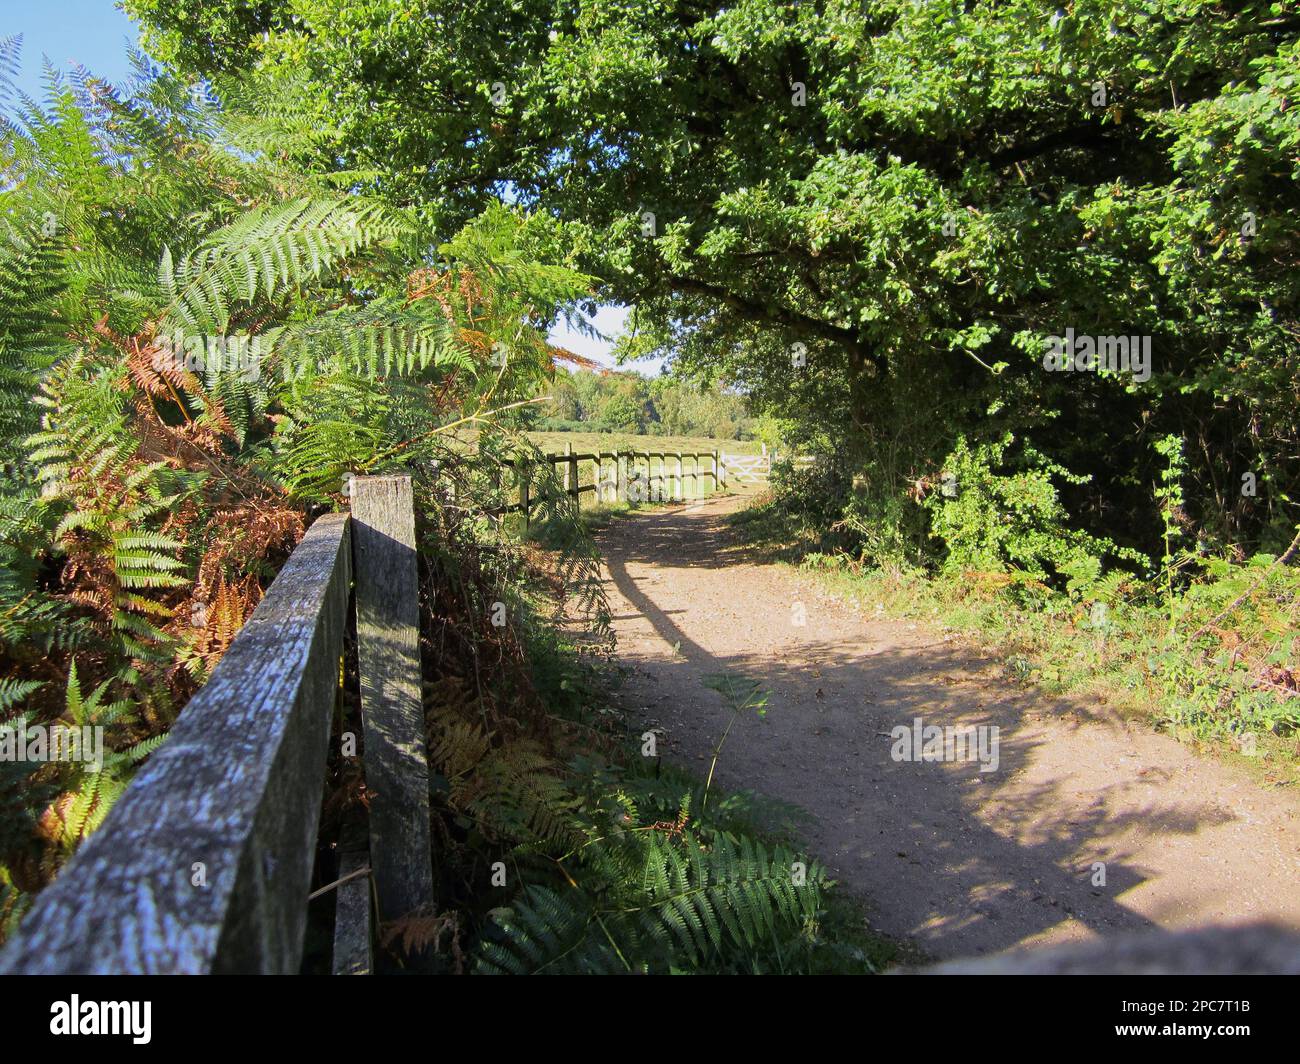 Fence and path at edge of heathland and woodland habitat, Poor's Field, Ruislip Woods N. N. R. London Borough of Hillingdon, Greater London, England Stock Photo